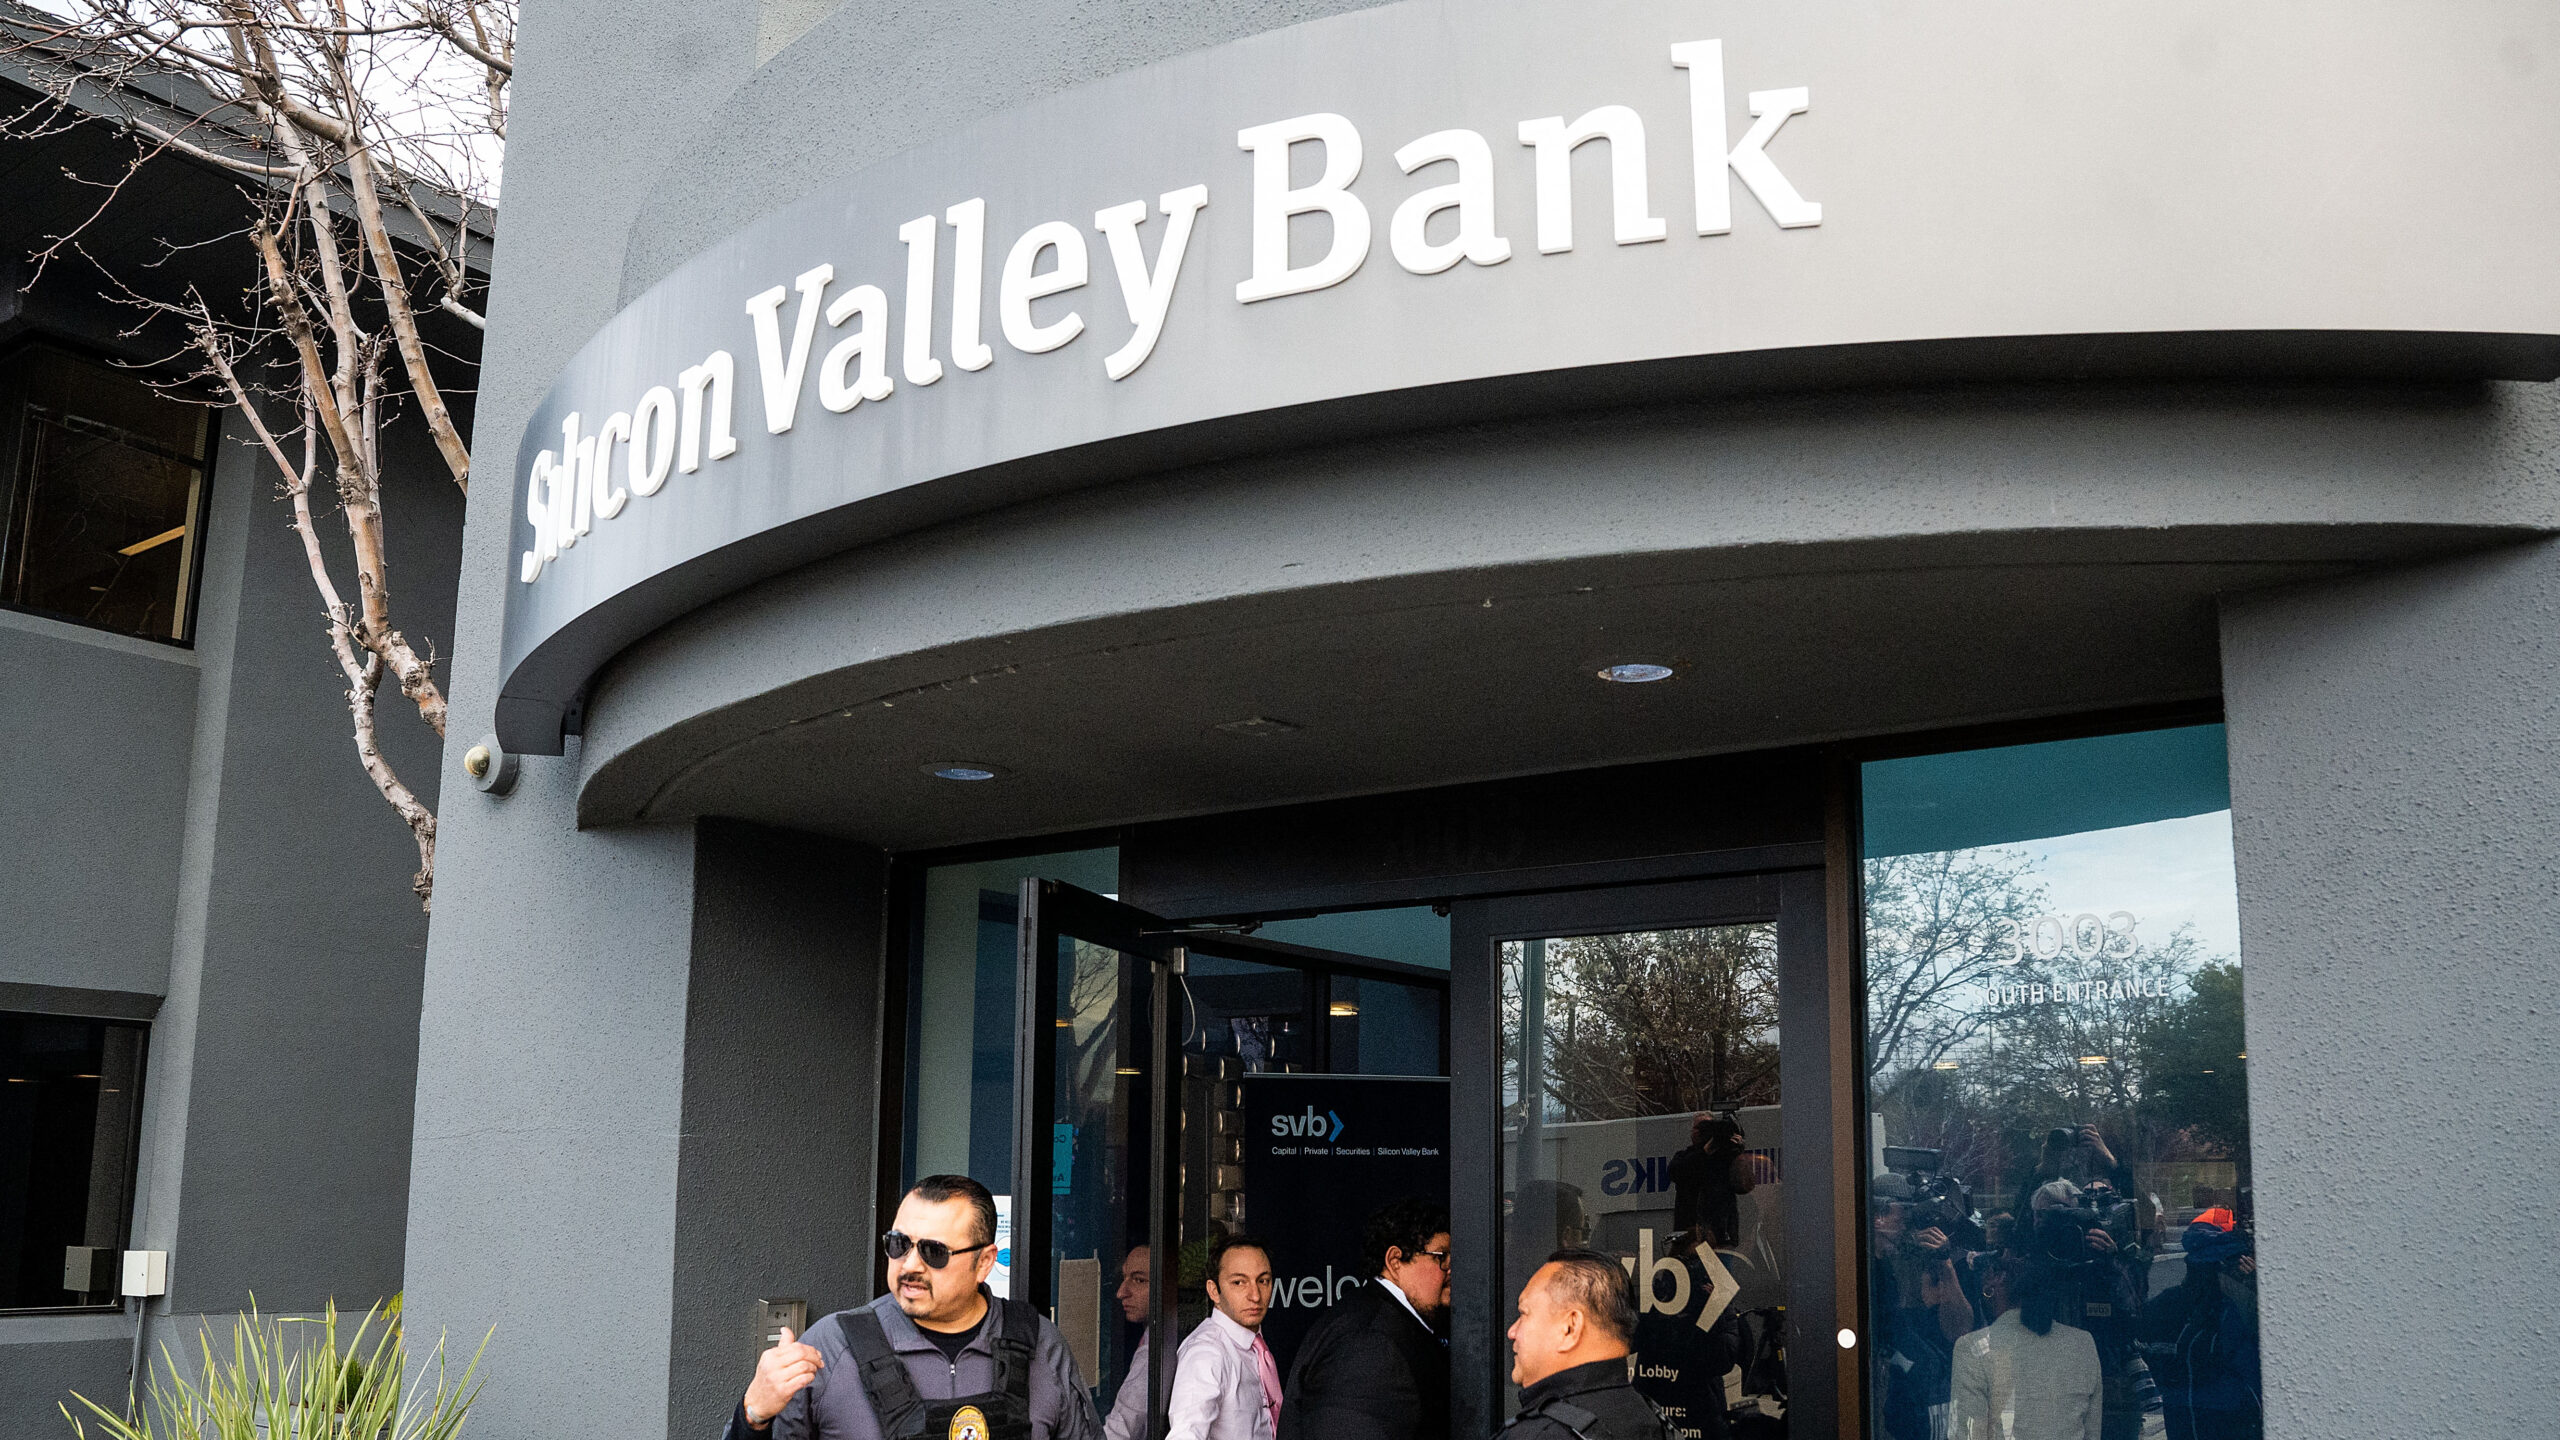 Security guards and FDIC representatives open a Silicon Valley Bank (SVB) branch for customers at SVBs headquarters in Santa Clara, California, on March 13, 2023. – US President Biden sought to reassure Americans over the country’s banking system on Monday, while insisting emergency measures would not be paid for by taxpayers, as additional banks came under stress following the collapse of Silicon Valley Bank last week, the second largest bank failure in history, and New York regulators took control of Signature Bank on Sunday. (Photo by NOAH BERGER / AFP)